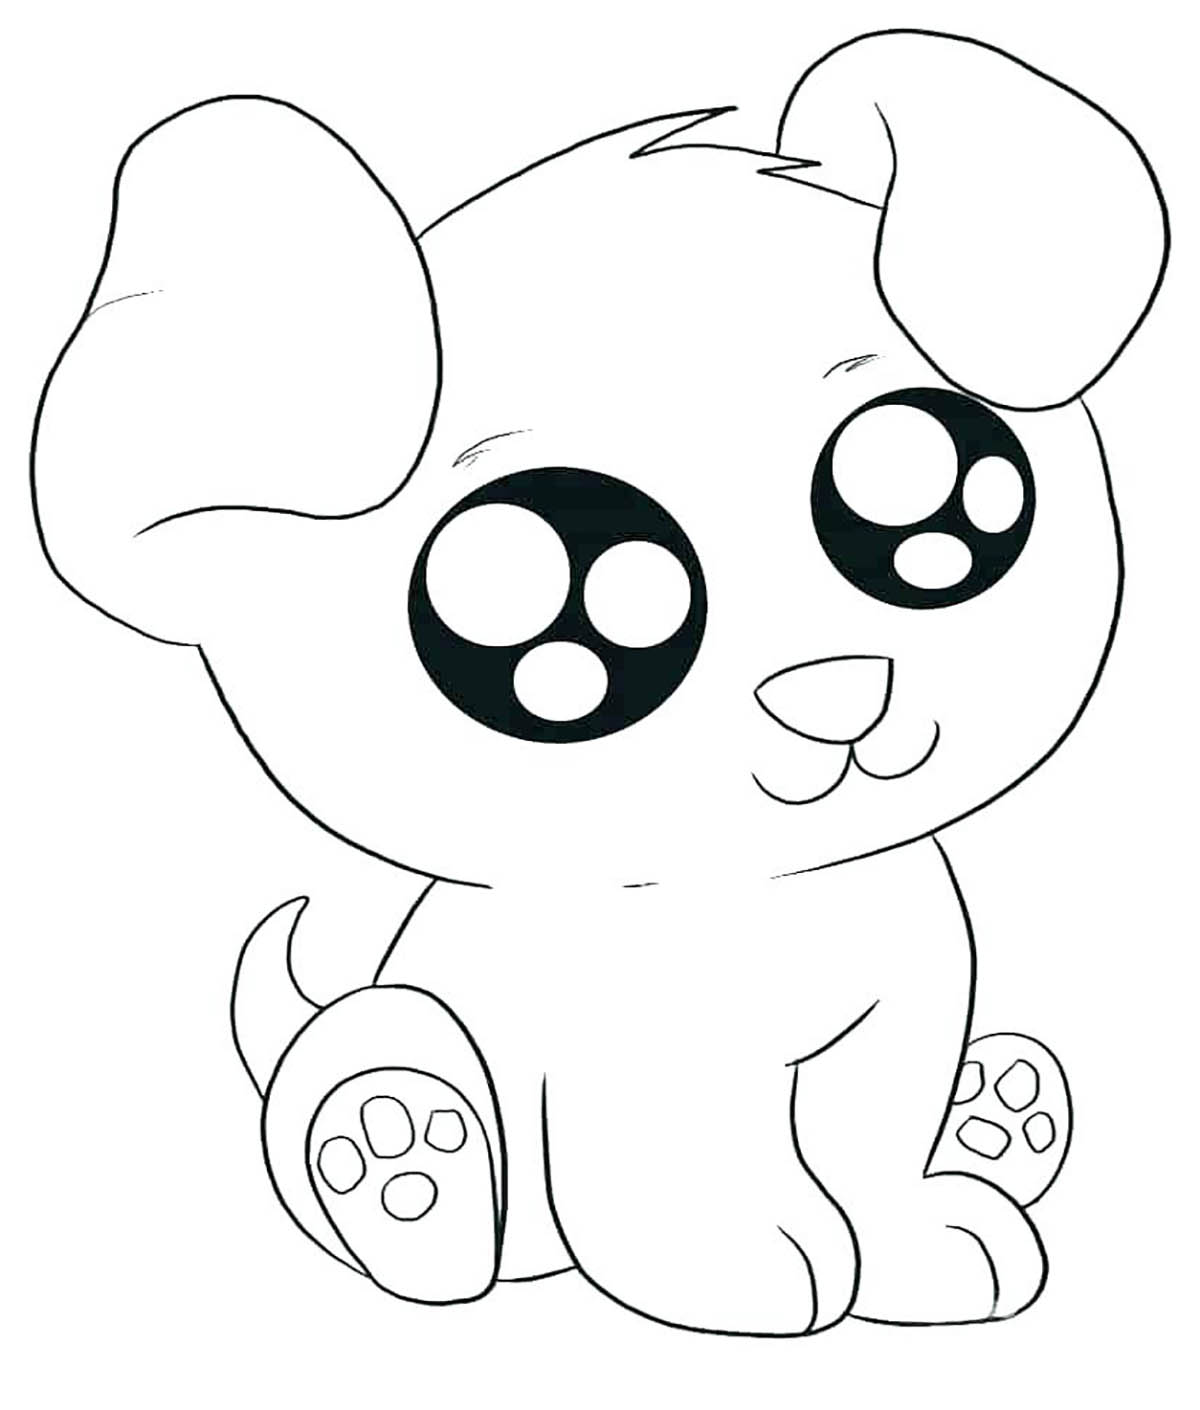 Download Dogs to print : Kawaï dog - Dogs Kids Coloring Pages